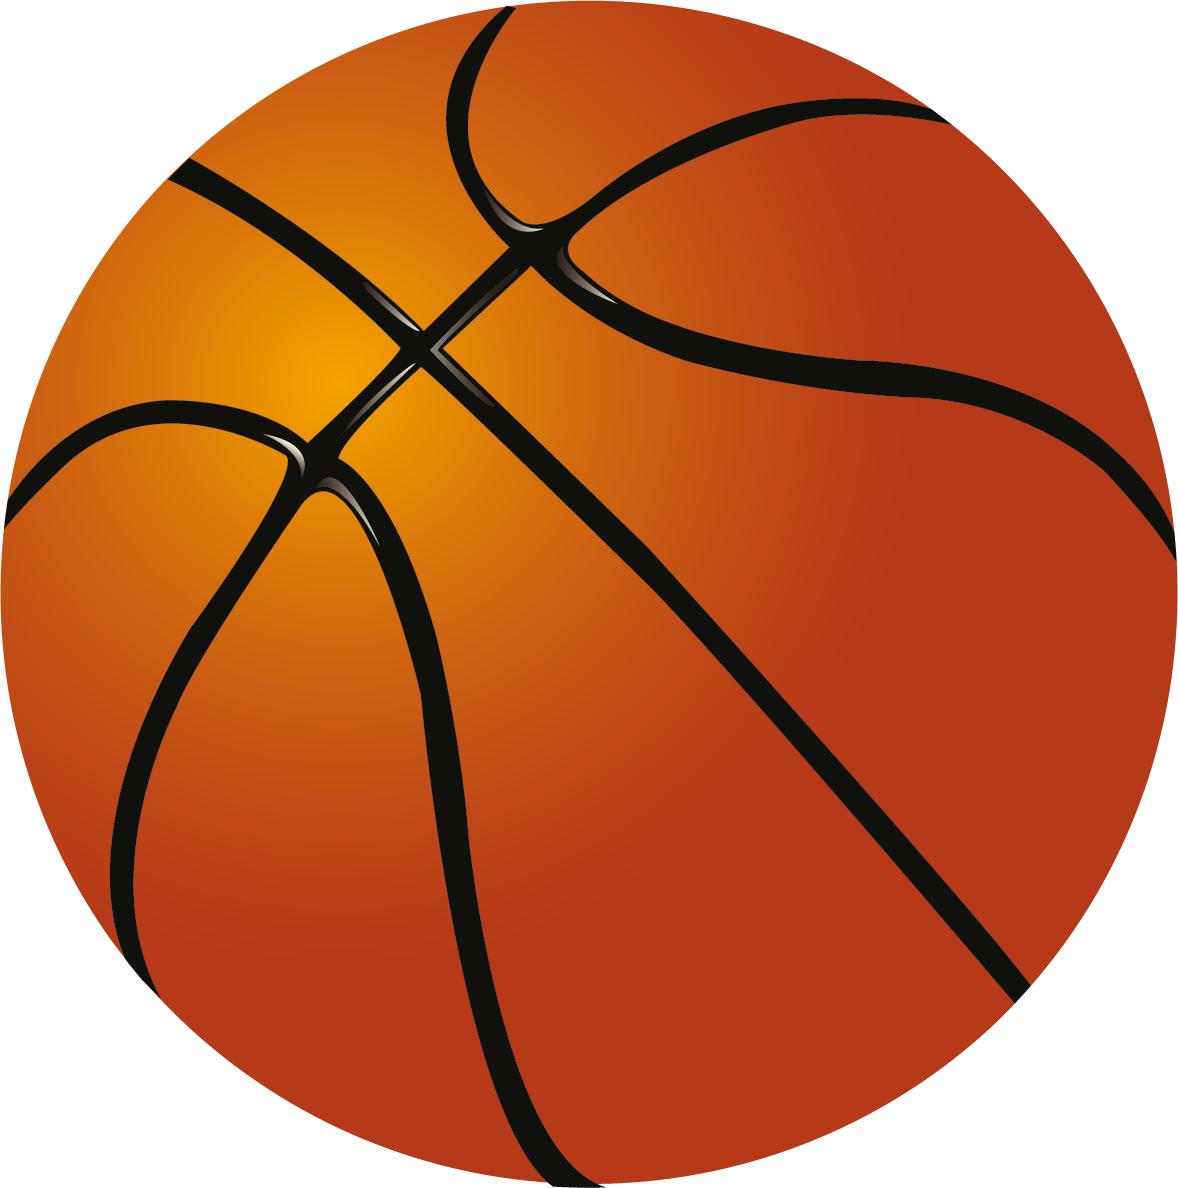 Father clipart basketball. Panda free images recipes